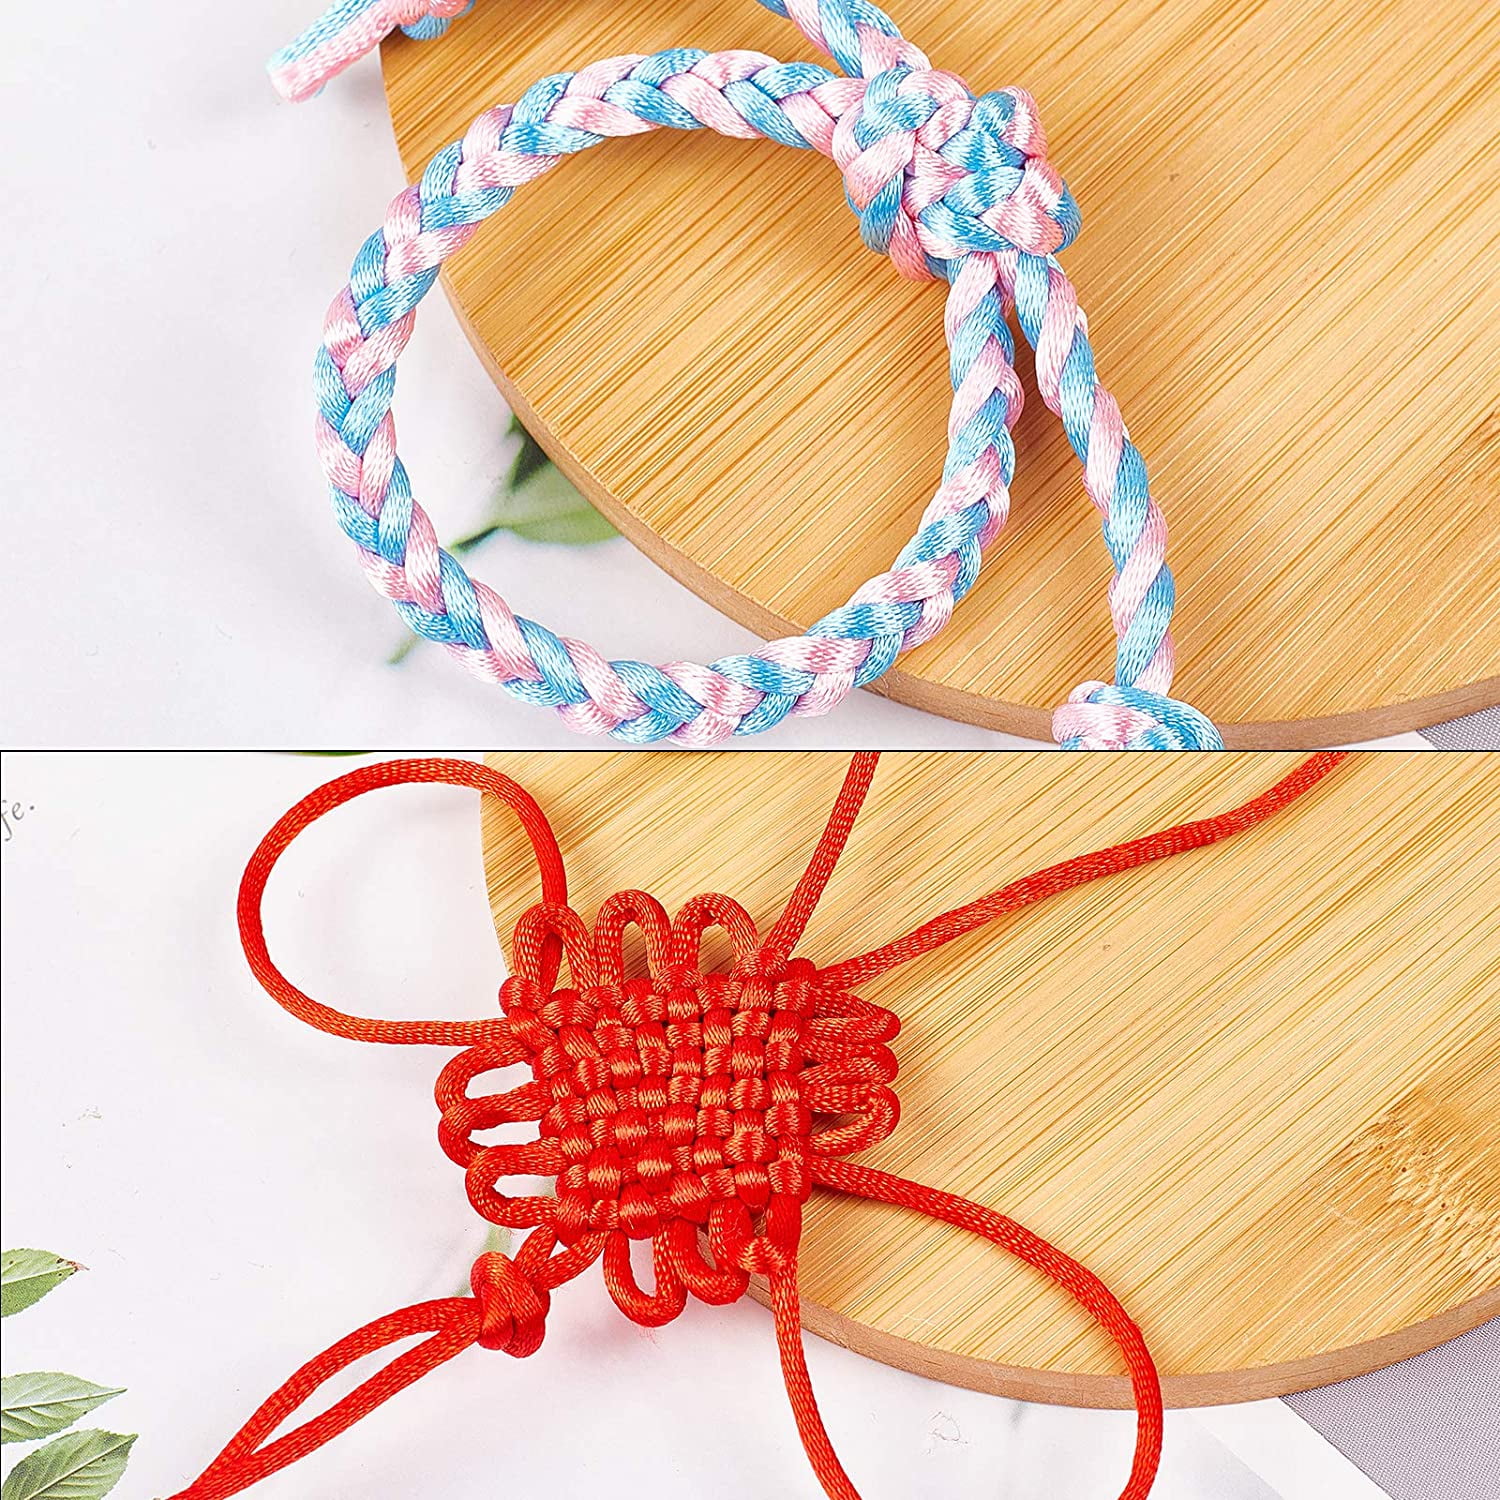 Charm Love Friendship Bracelets: 35 Unique Designs with Polymer Clay,  Macrame, Knotting, and Braiding * Make your own charms with polymer clay!